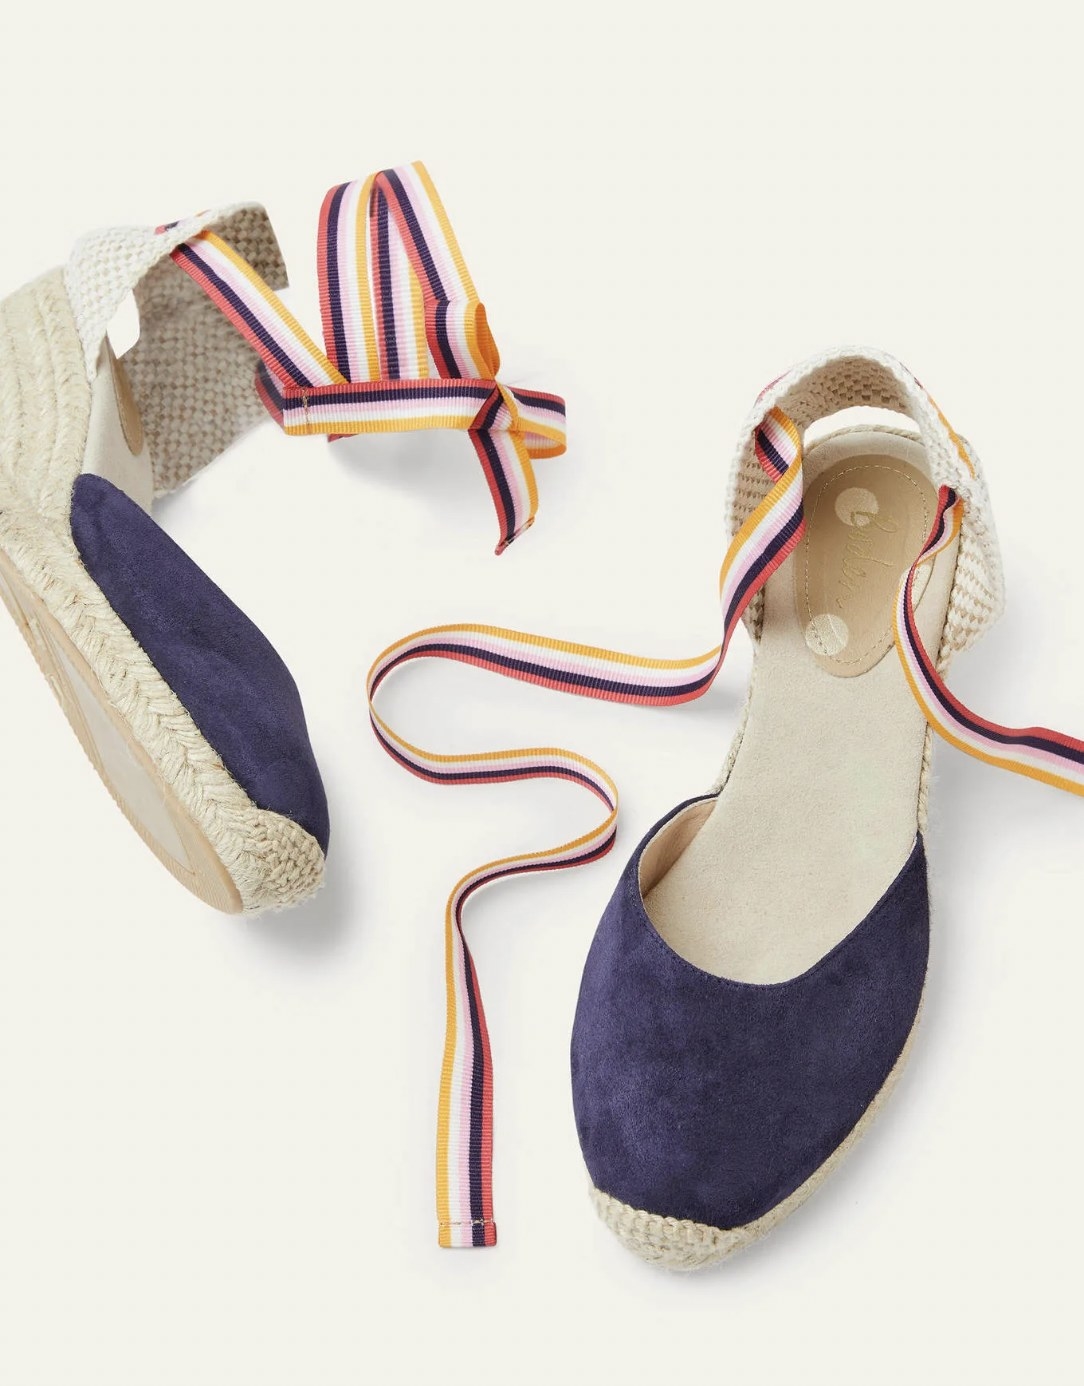 The blue suede sandals with multi-colored ribbon ties